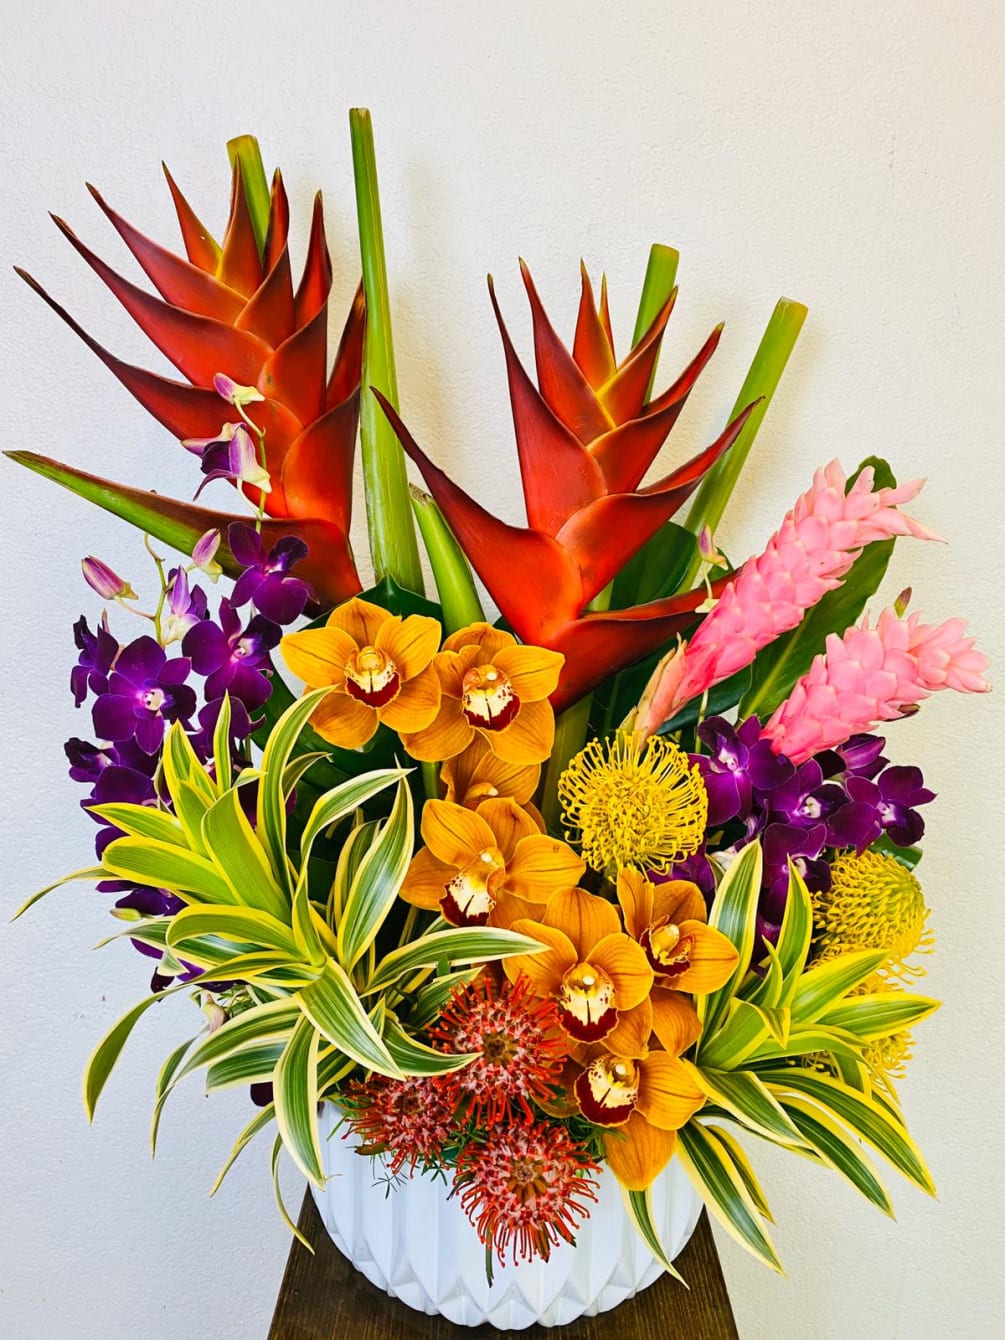 Named after the spirited last Princess of Hawaii, this stunning arrangement may